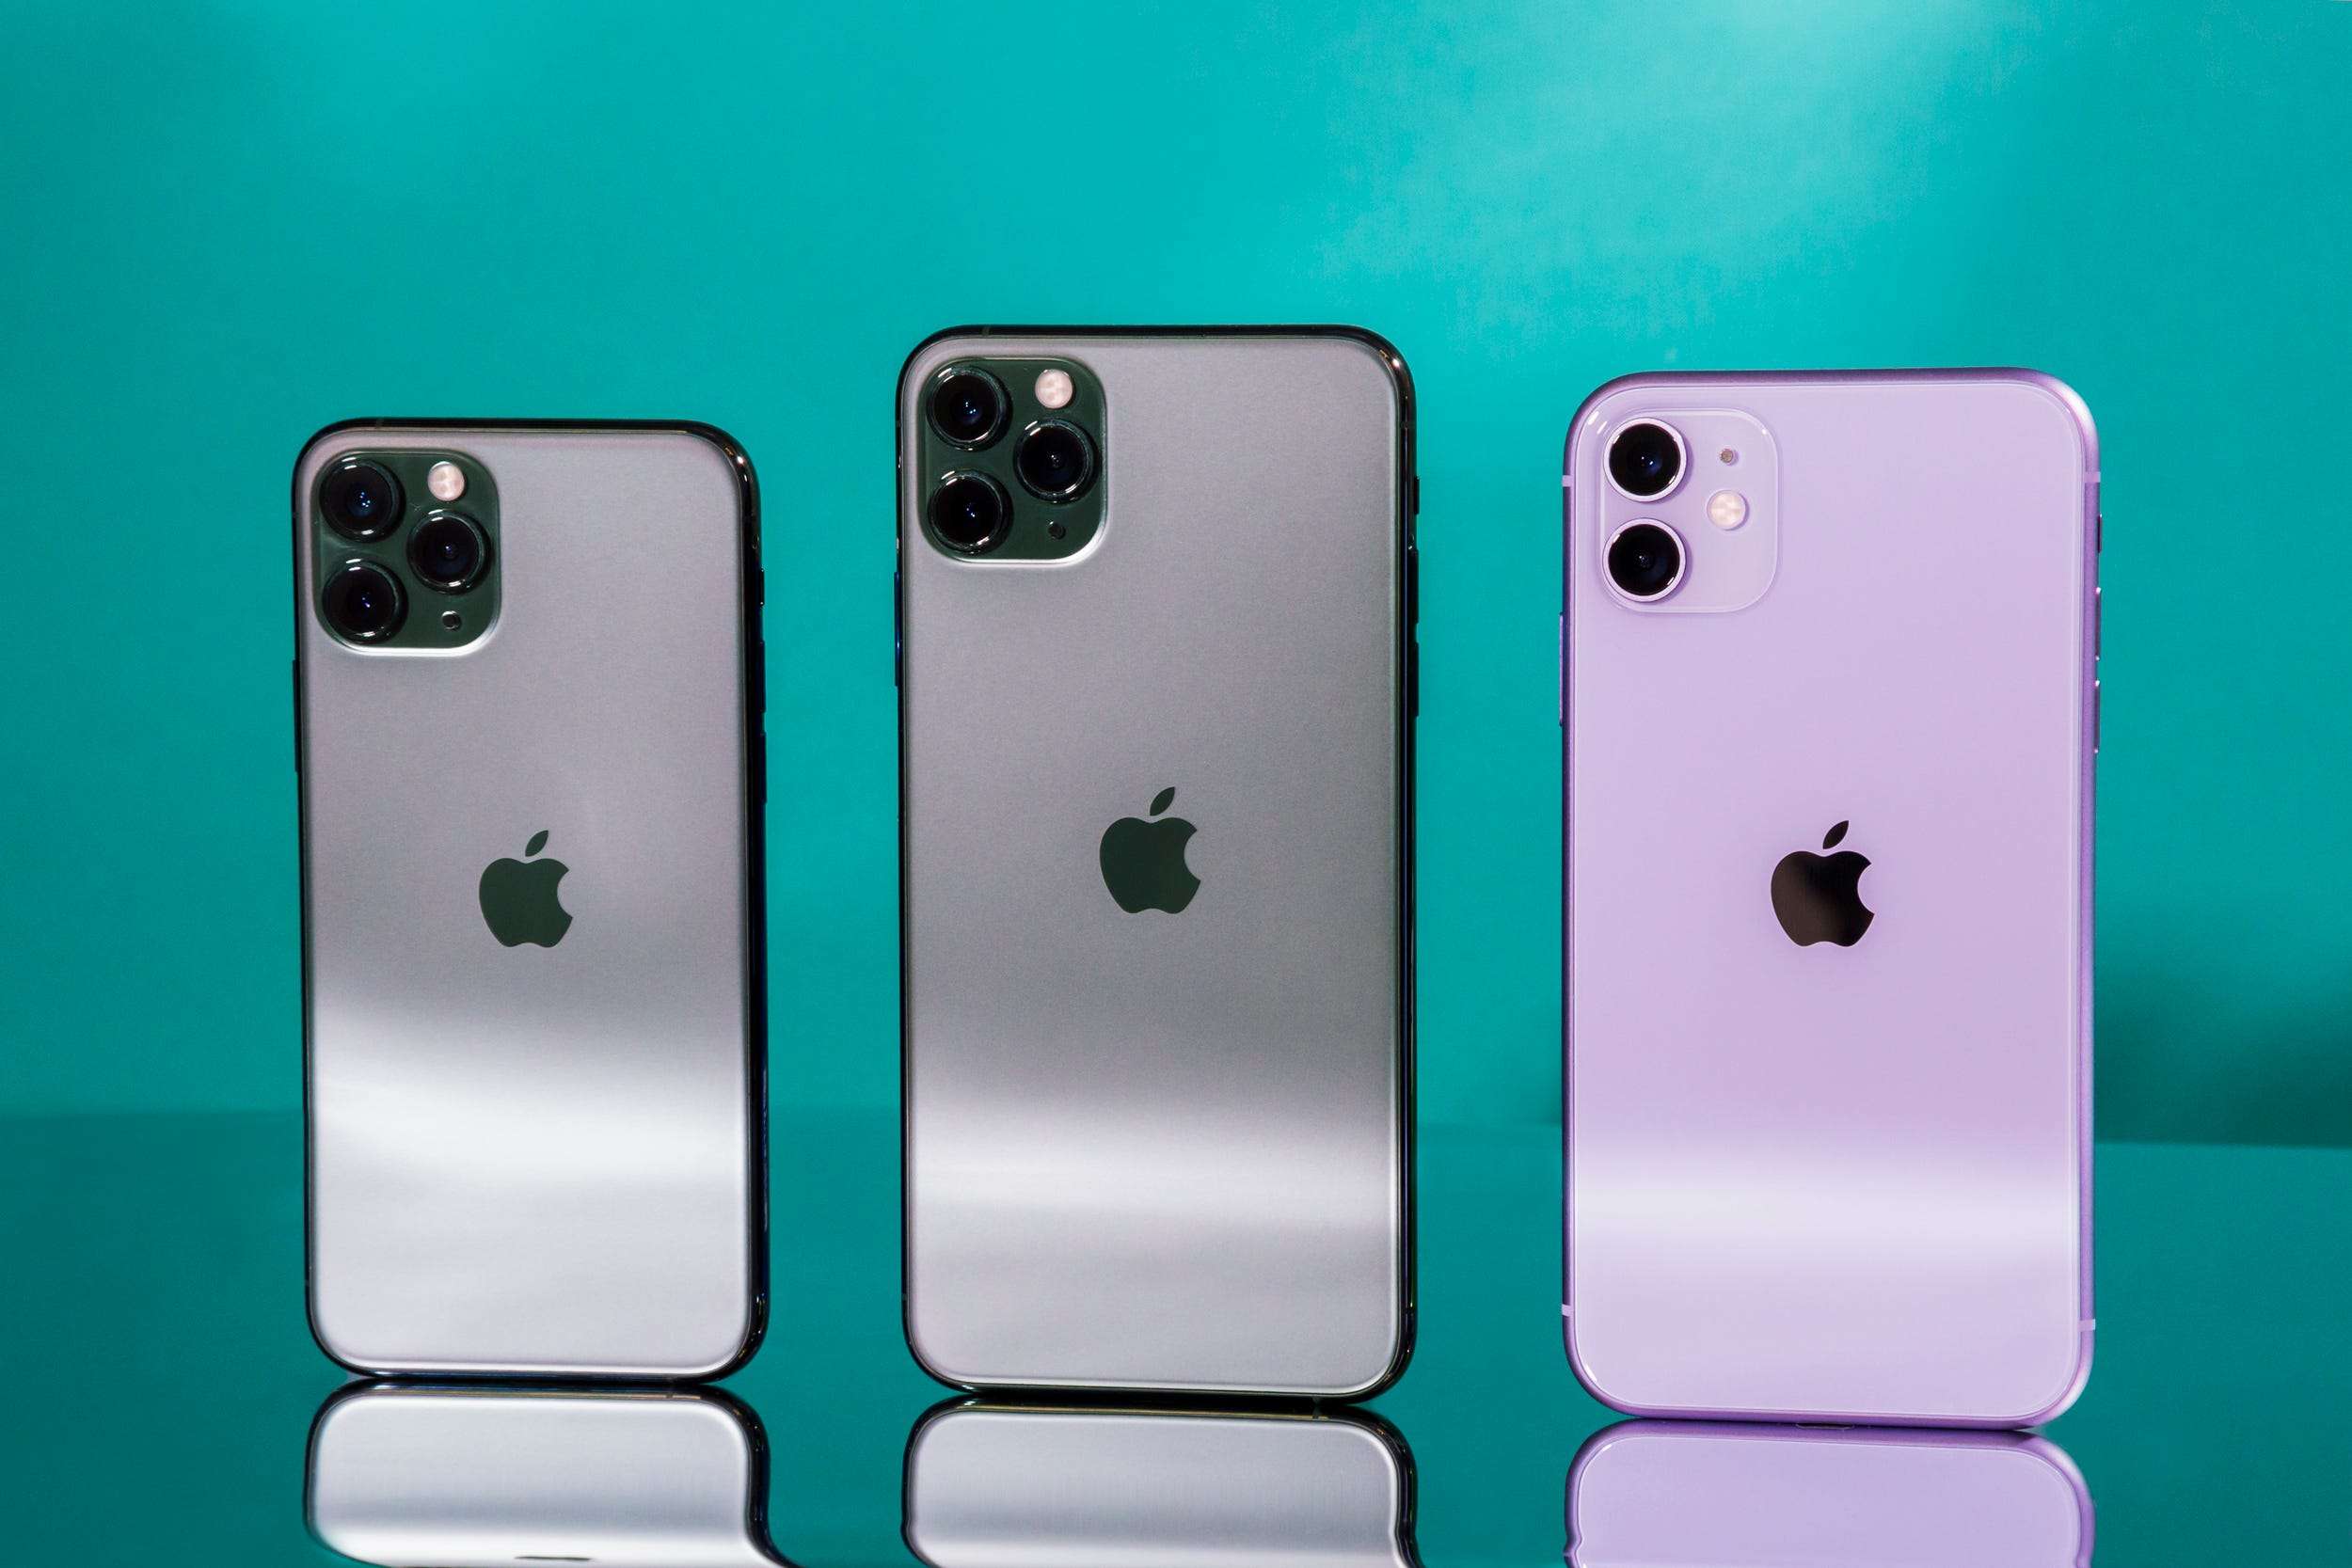 Apple could launch the iPhone 12 in 4 different versions